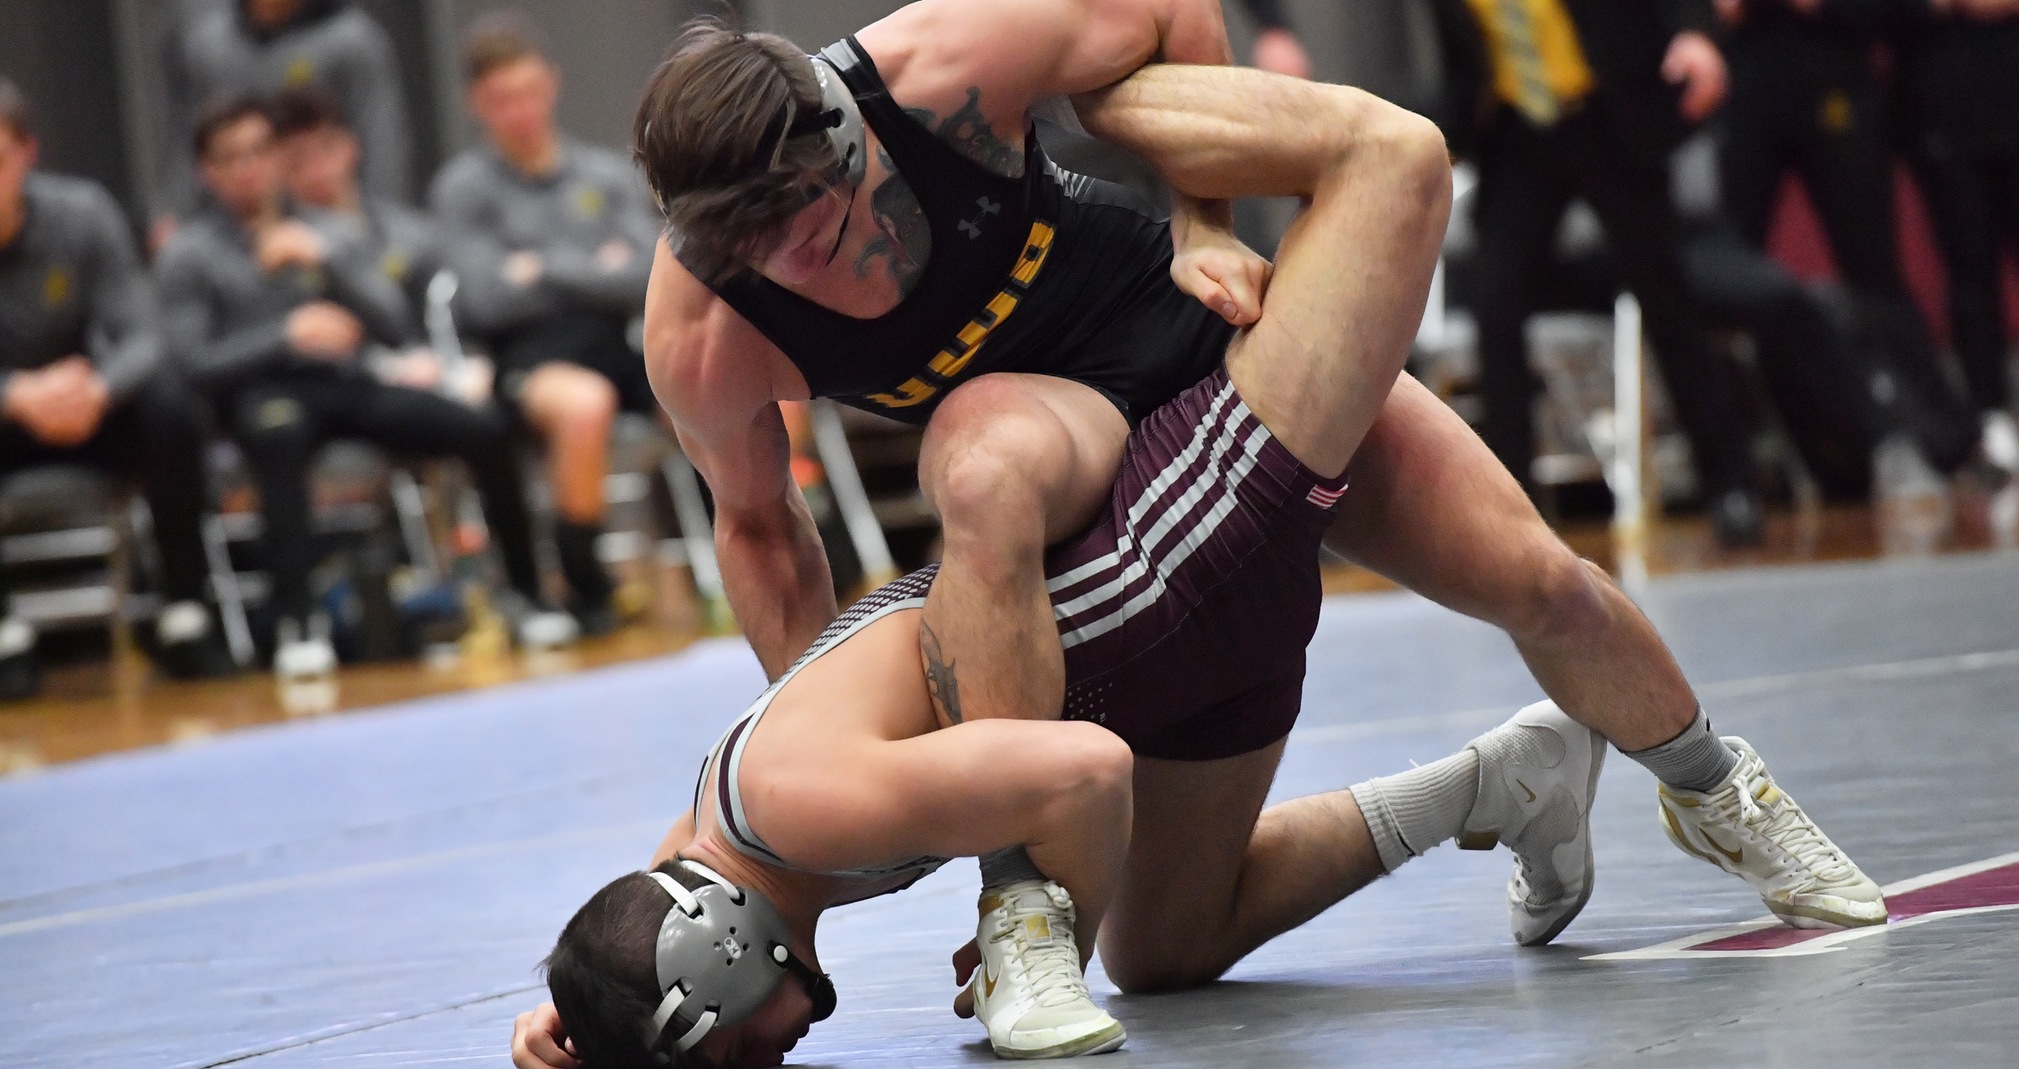 Mark Choinski compiled a 5-1 record en route to a third-place finish (165 pounds) at the Pete Willson Invitational.